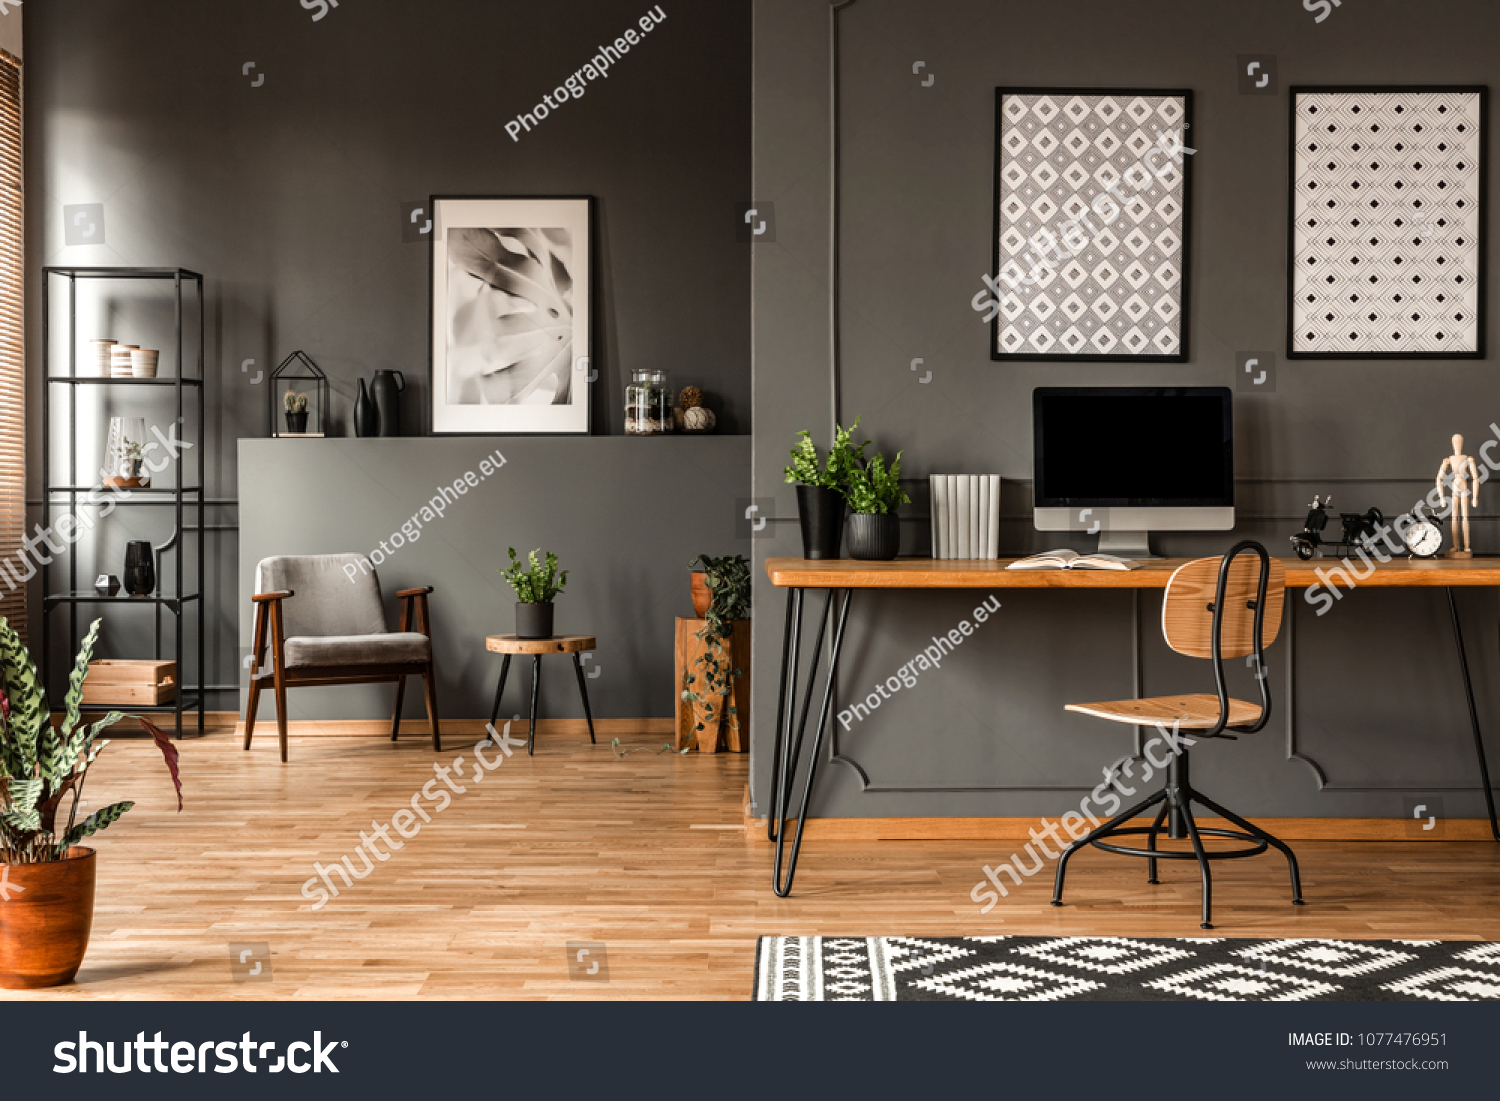 Patterned posters above desk with computer monitor in grey home office interior with plants #1077476951